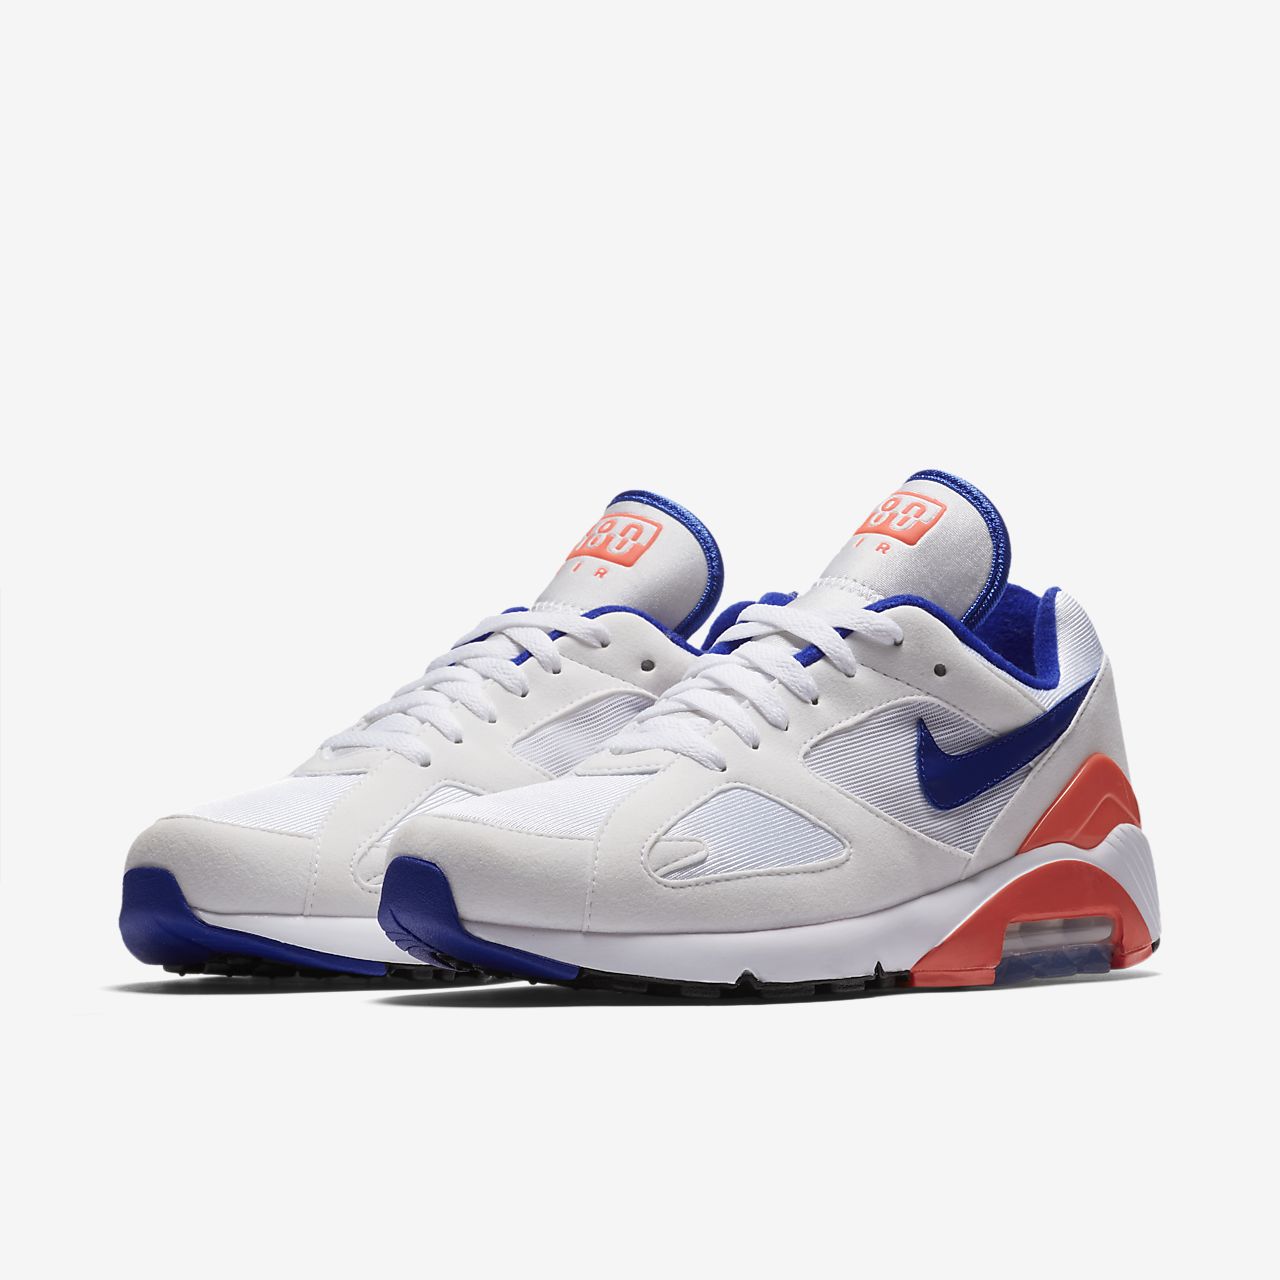 Buy air max 180s \u003e up to 65% Discounts